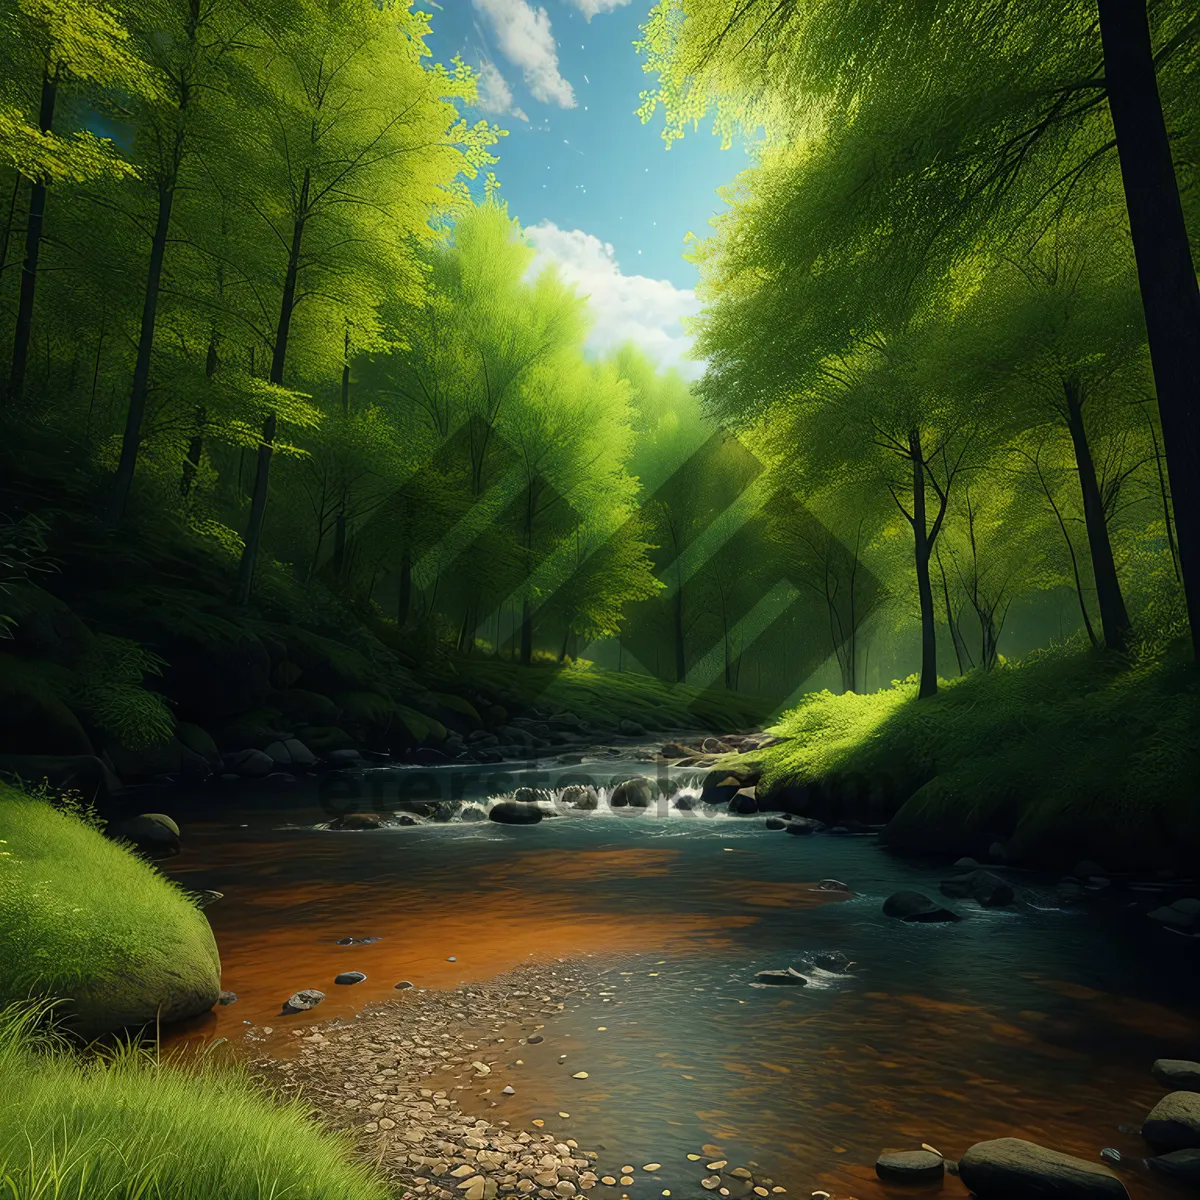 Picture of Serene River Flow Through Mountainous Forest